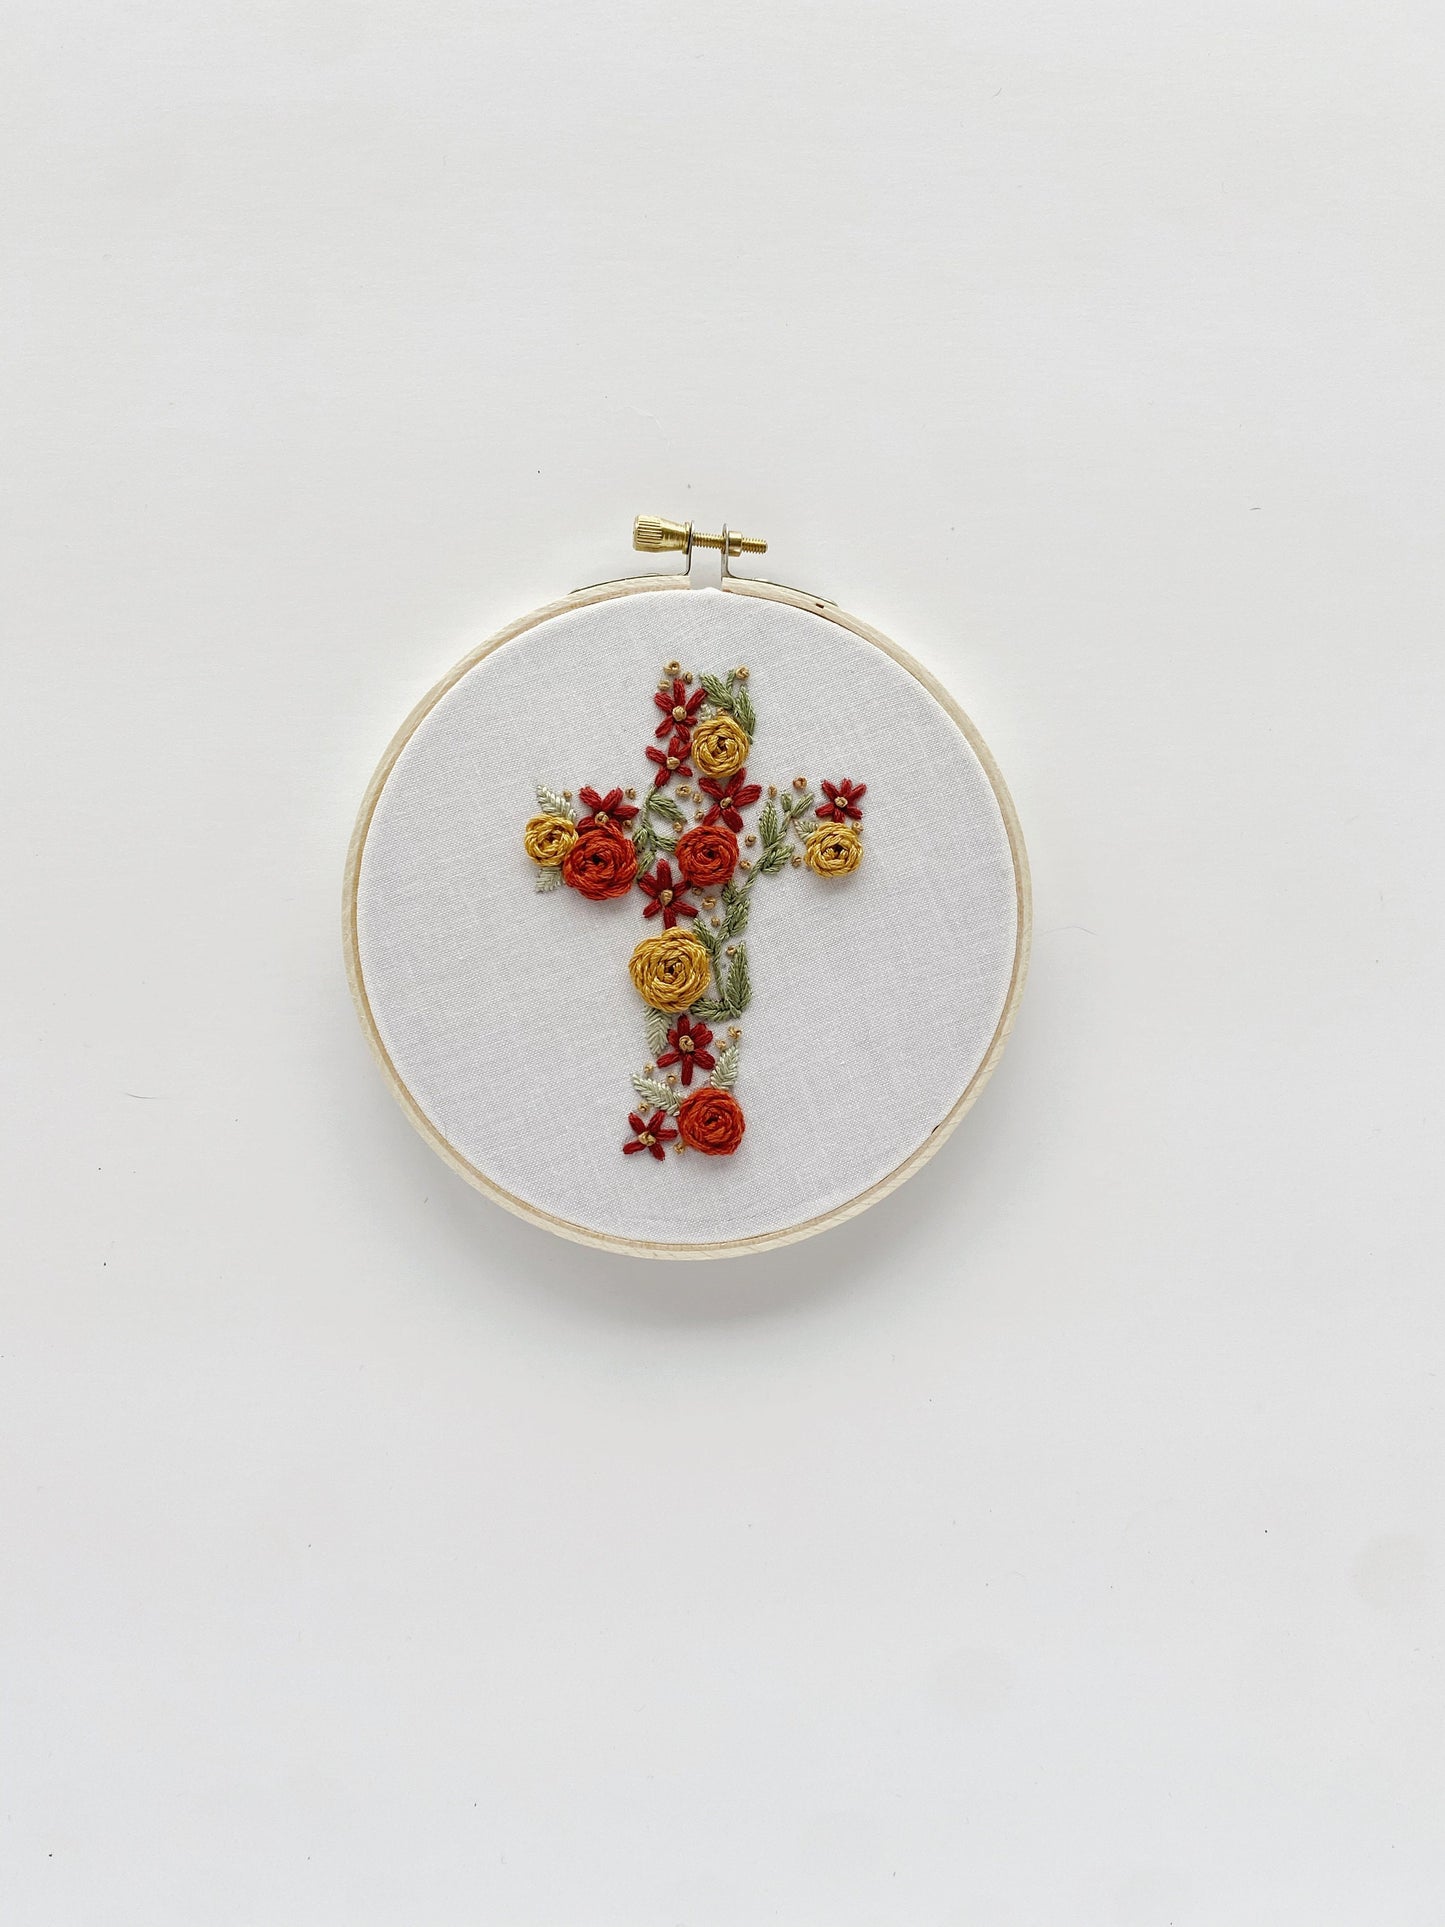 The Beautiful Cross | 5” | Modern Floral Cross Christian Embroidery Hoop Art for Home Decor